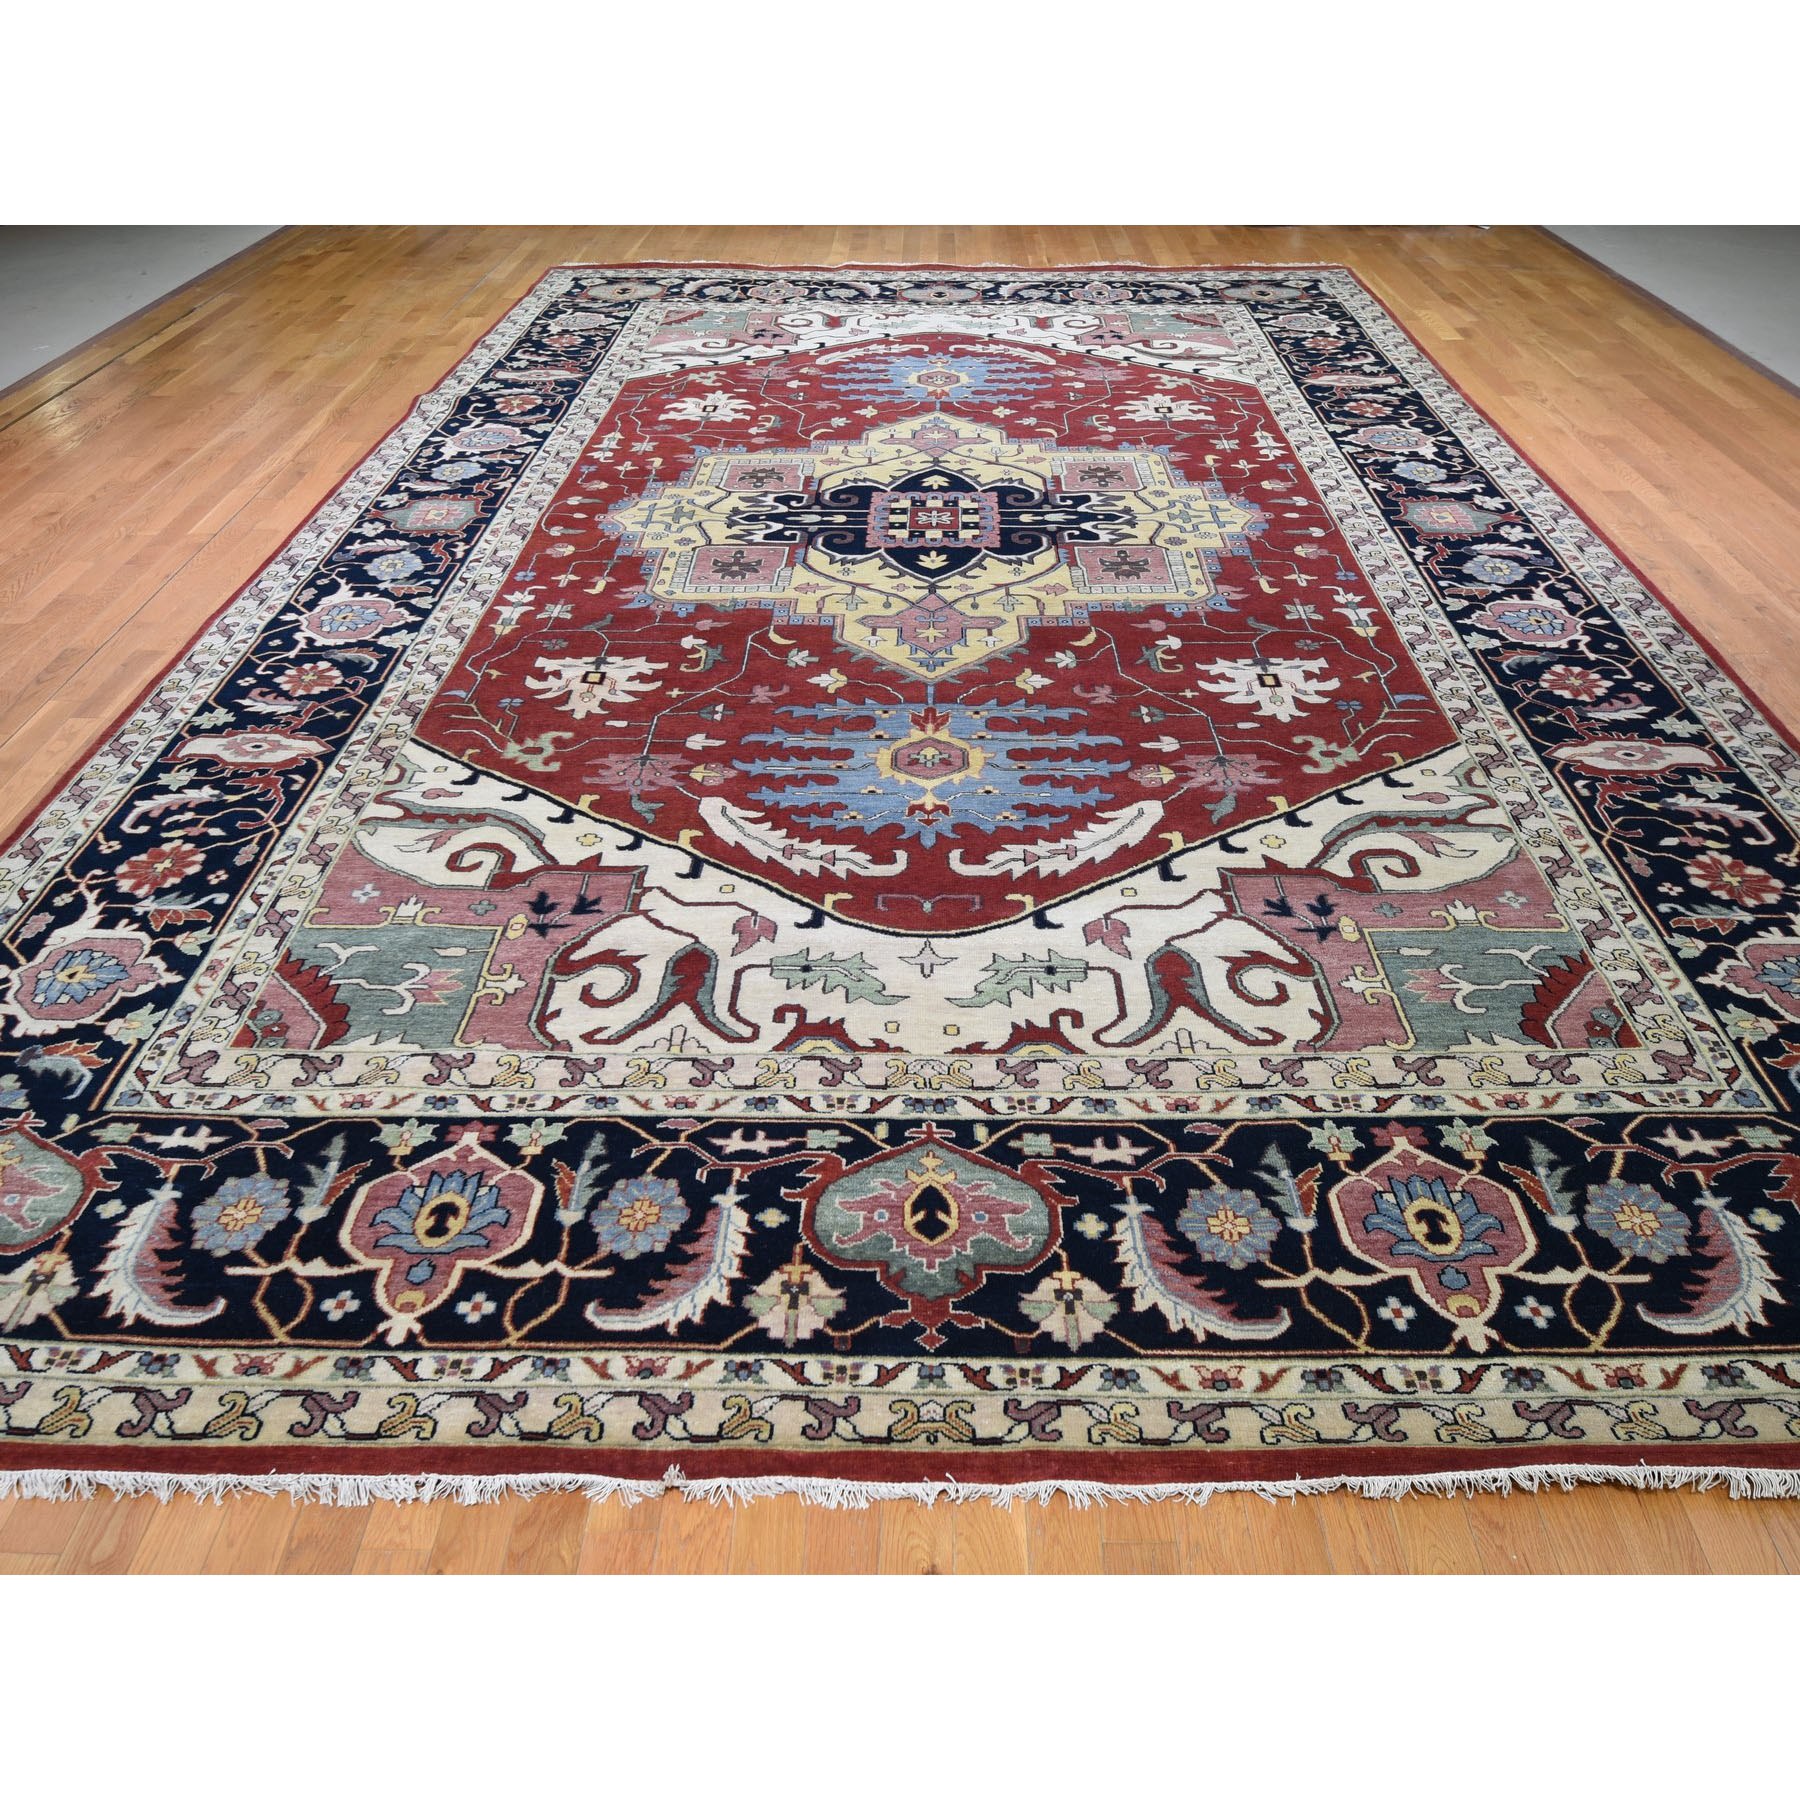 11'9"x18'4" Oversized Red Heriz Revival Pure Wool Hand Woven Oriental Rug 